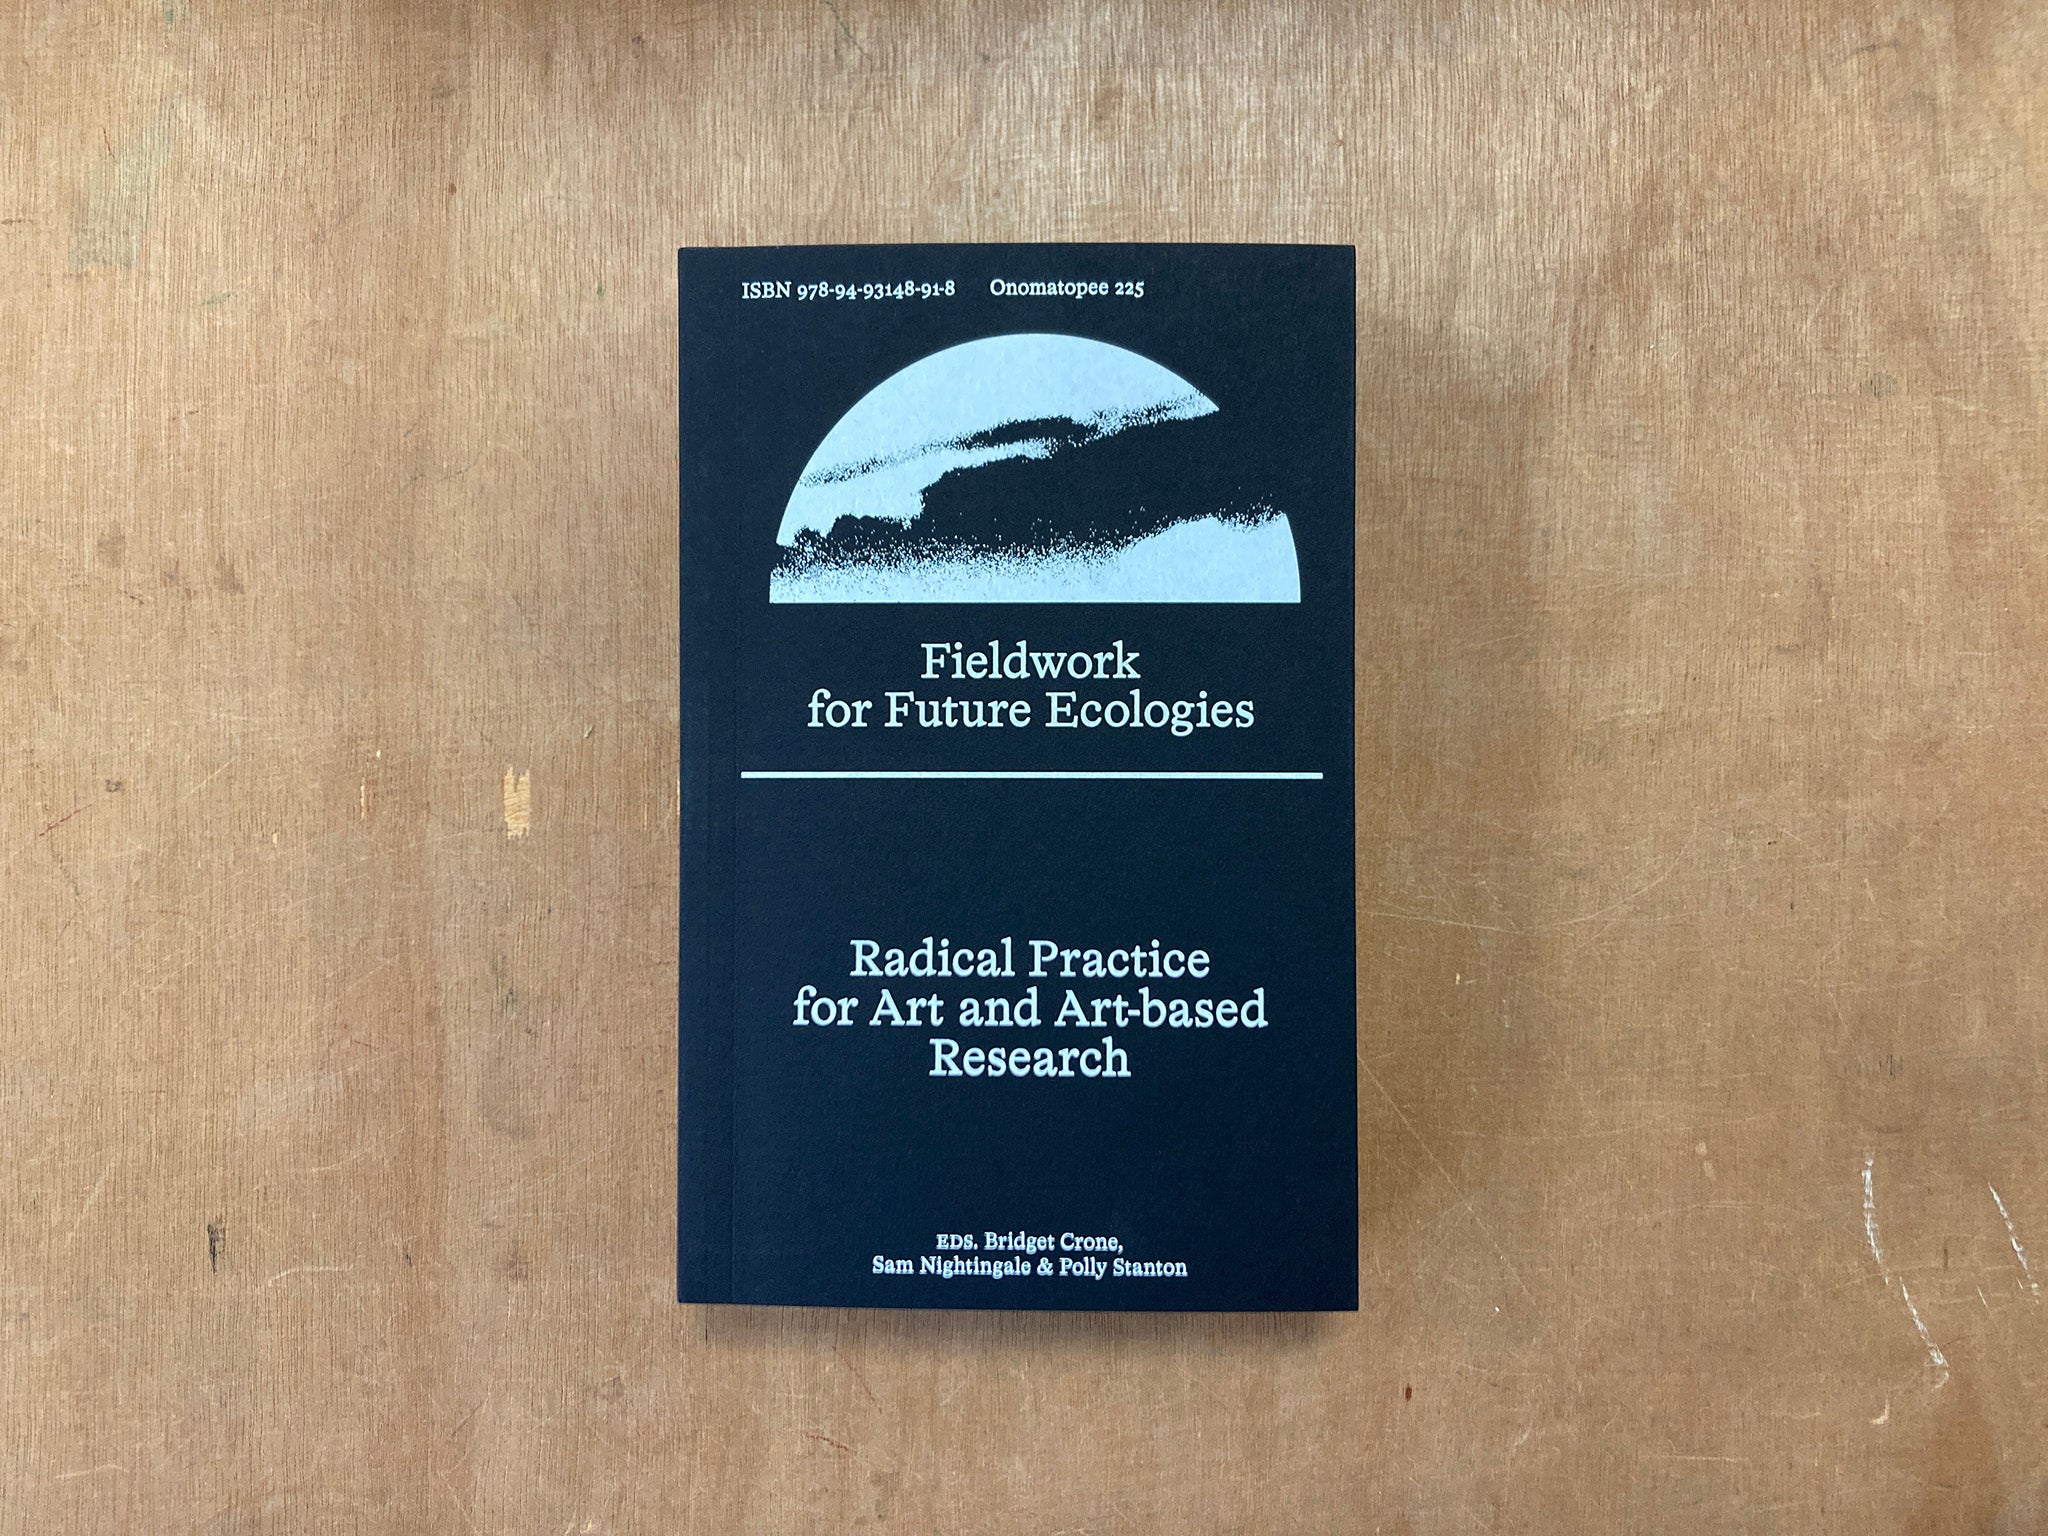 FIELDWORK FOR FUTURE ECOLOGIES: RADICAL PRACTICE FOR ART AND ART-BASED RESEARCH